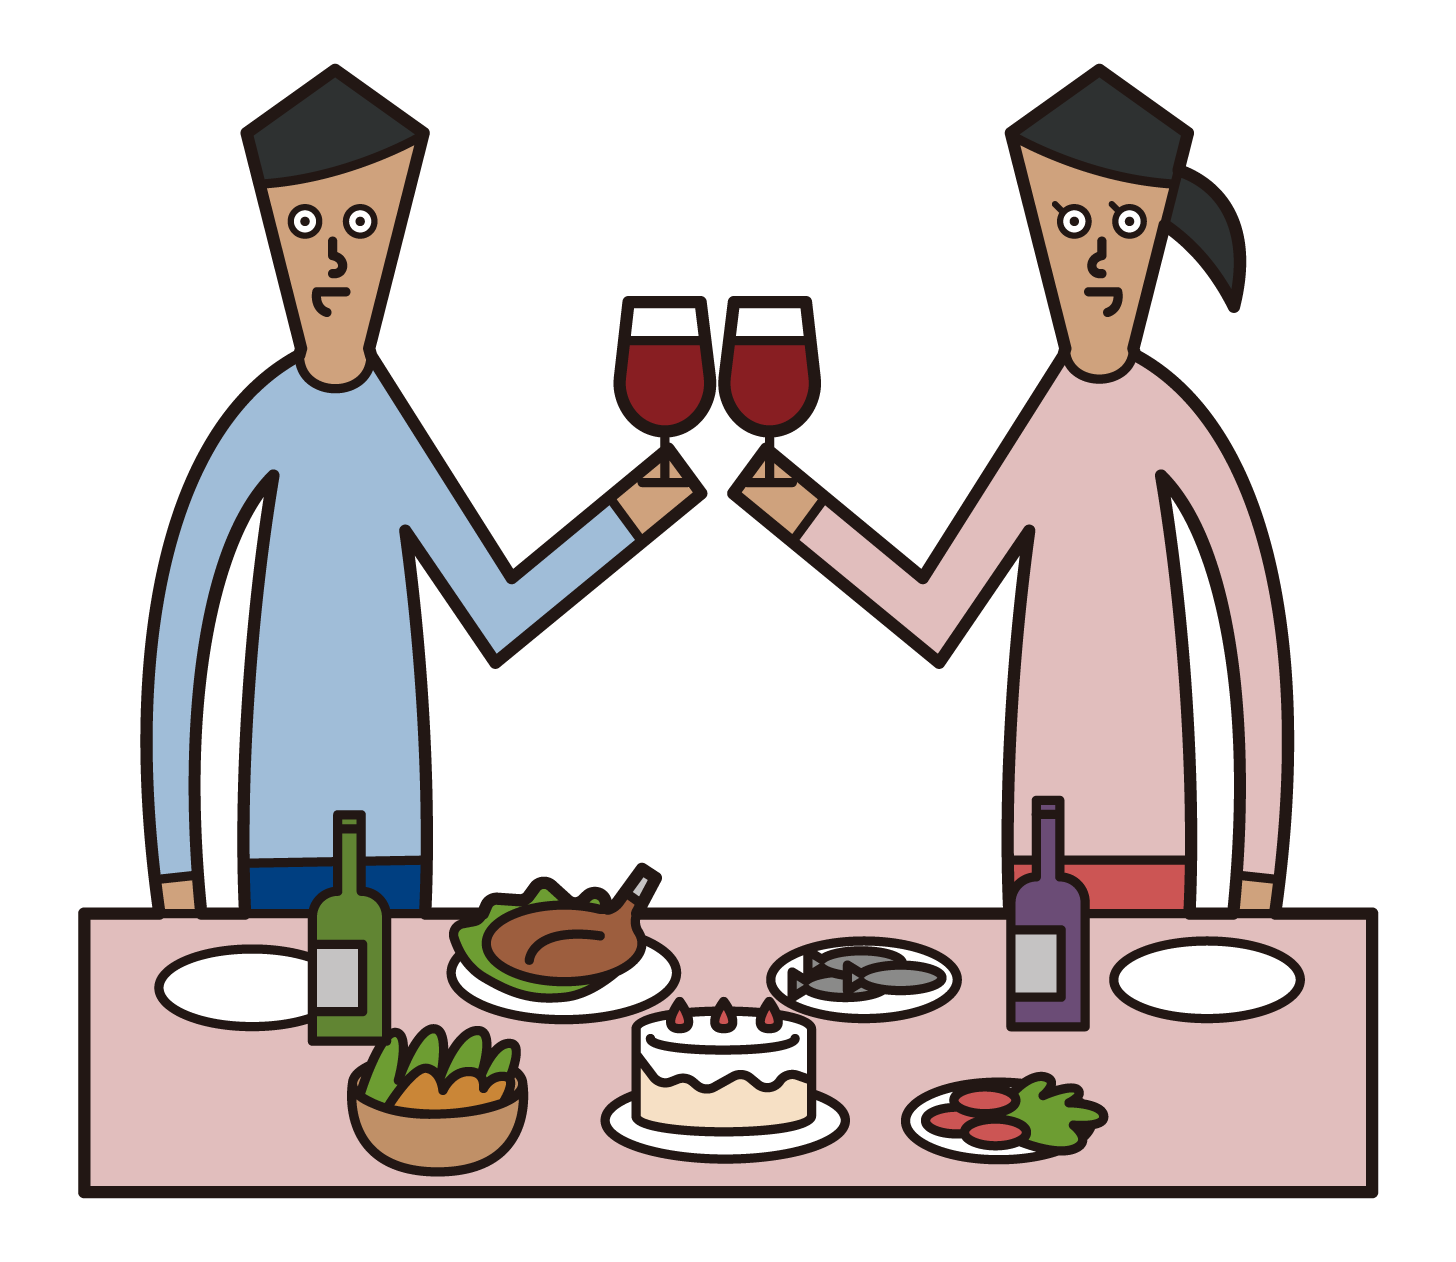 Illustrations of people (men and women) toasting